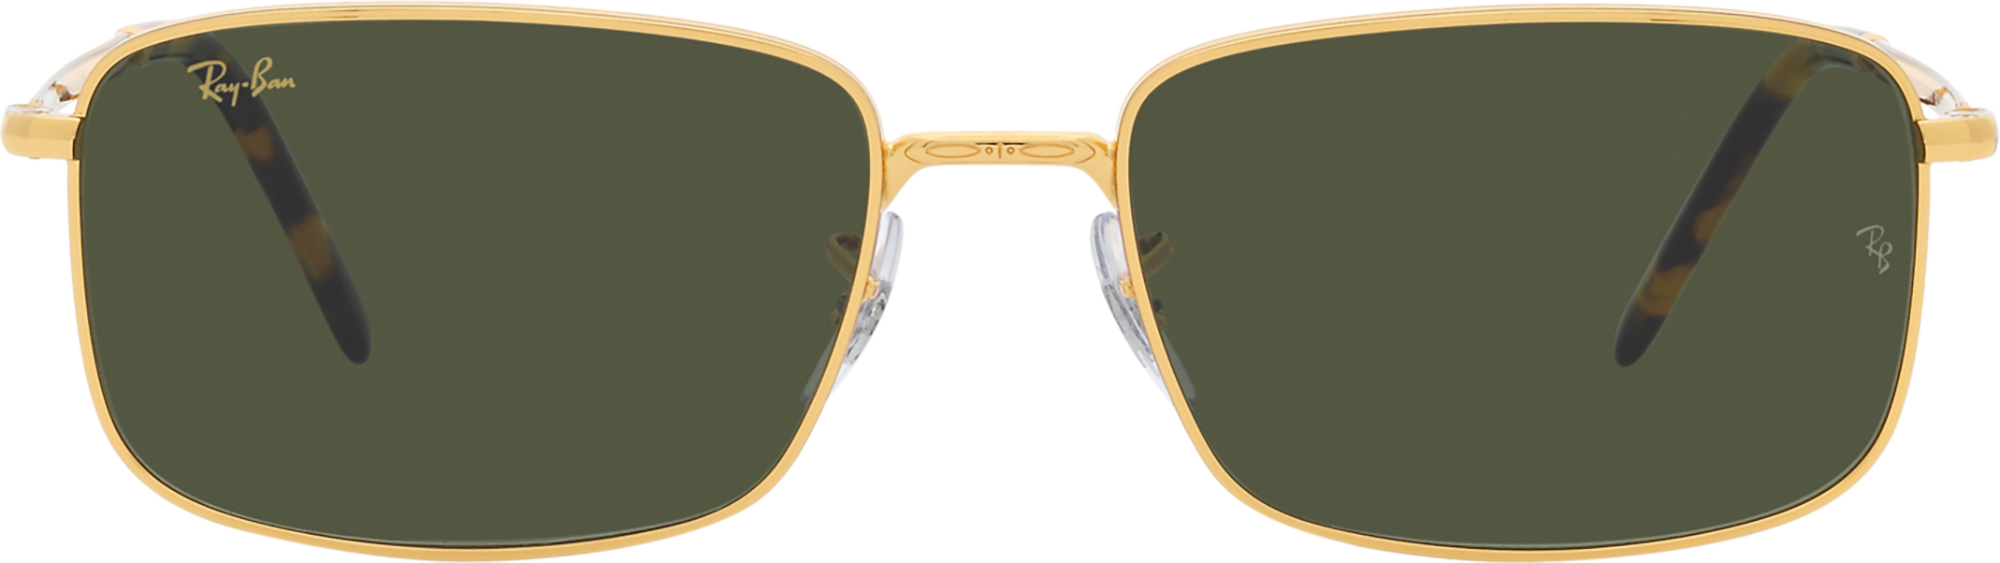 Ray-Ban 3717 image number null